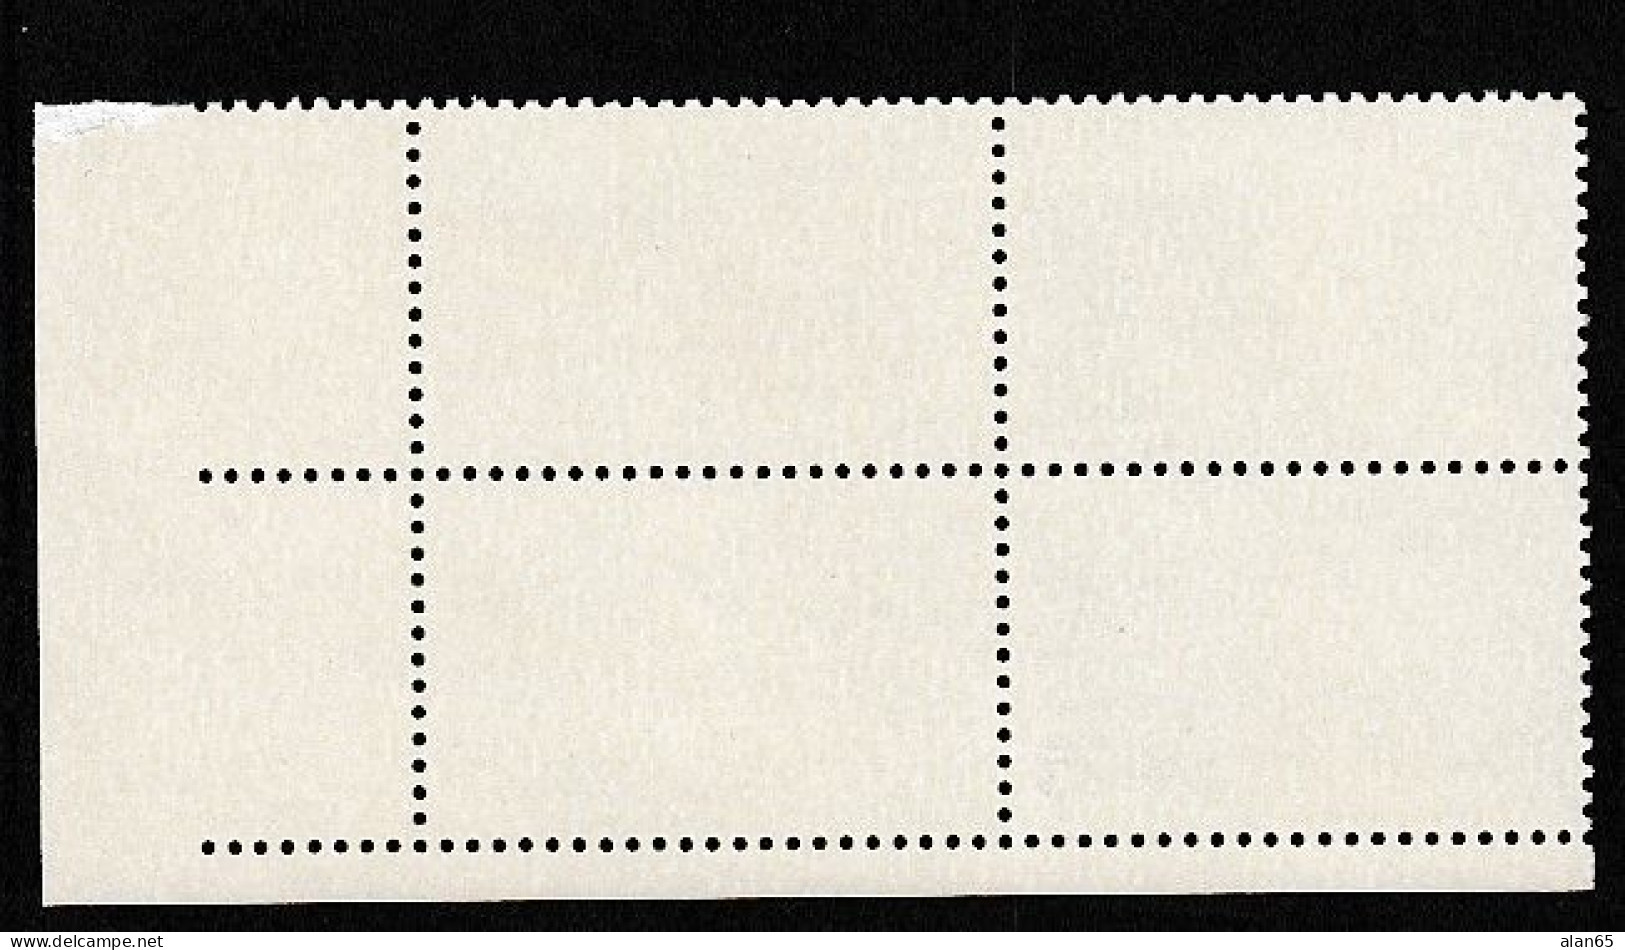 Sc#2506-2507, Micronesia & Marshall Islands, 25-cent 1990 Issue, Plate # Block Of 4 MNH US Postage Stamps - Plaatnummers